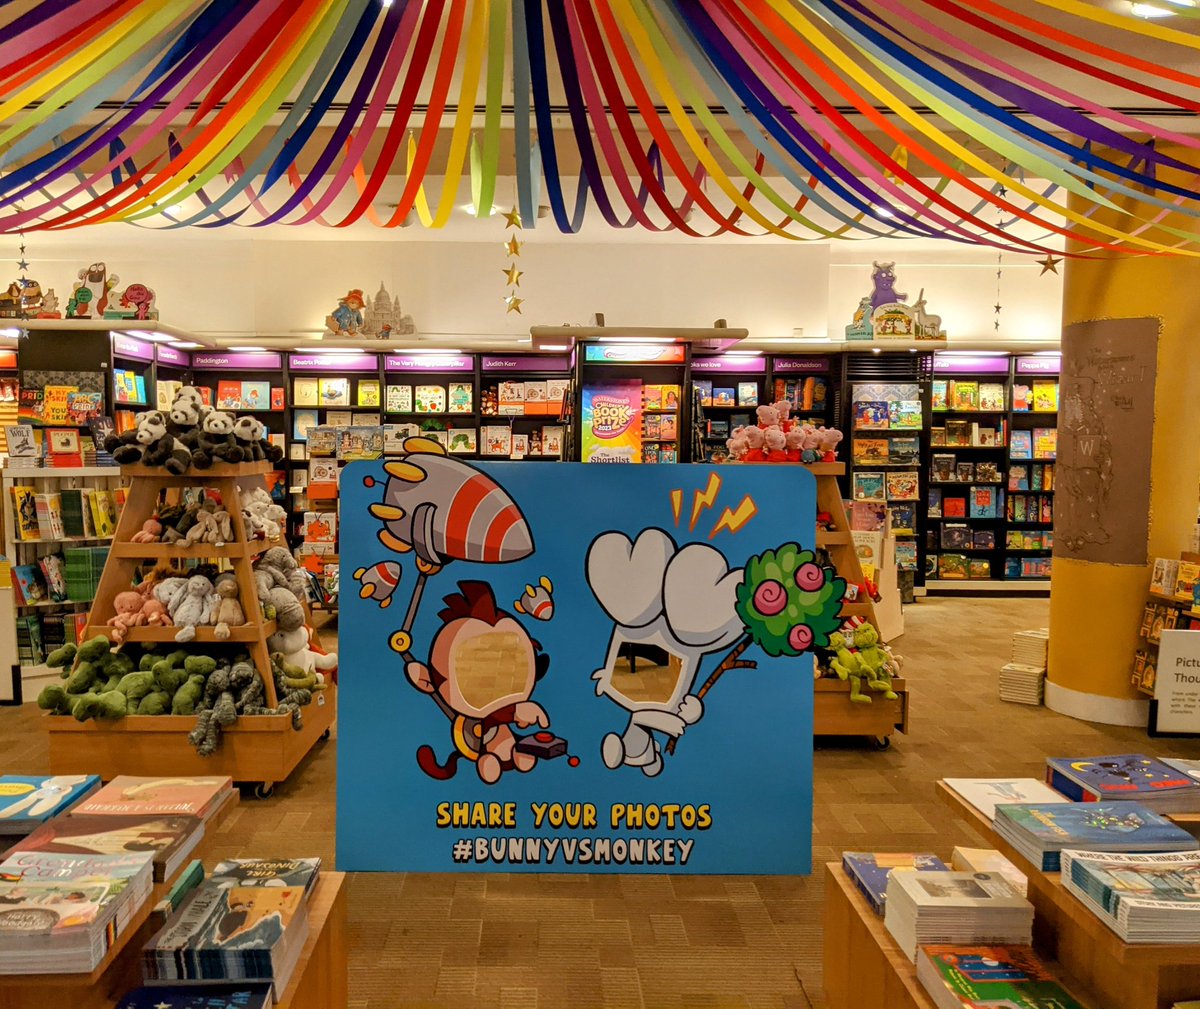 Check out this amazing @jamiesmart #BunnyVsMonkey fun zone at @WaterstonesPicc. OPEN NOW! Stickers, activity sheets, selfie area, doodle walls, how to draws, FREE comics, it's all there! & don't forget you can meet Jamie in person & grab a party bag too - bit.ly/3wZwLU3